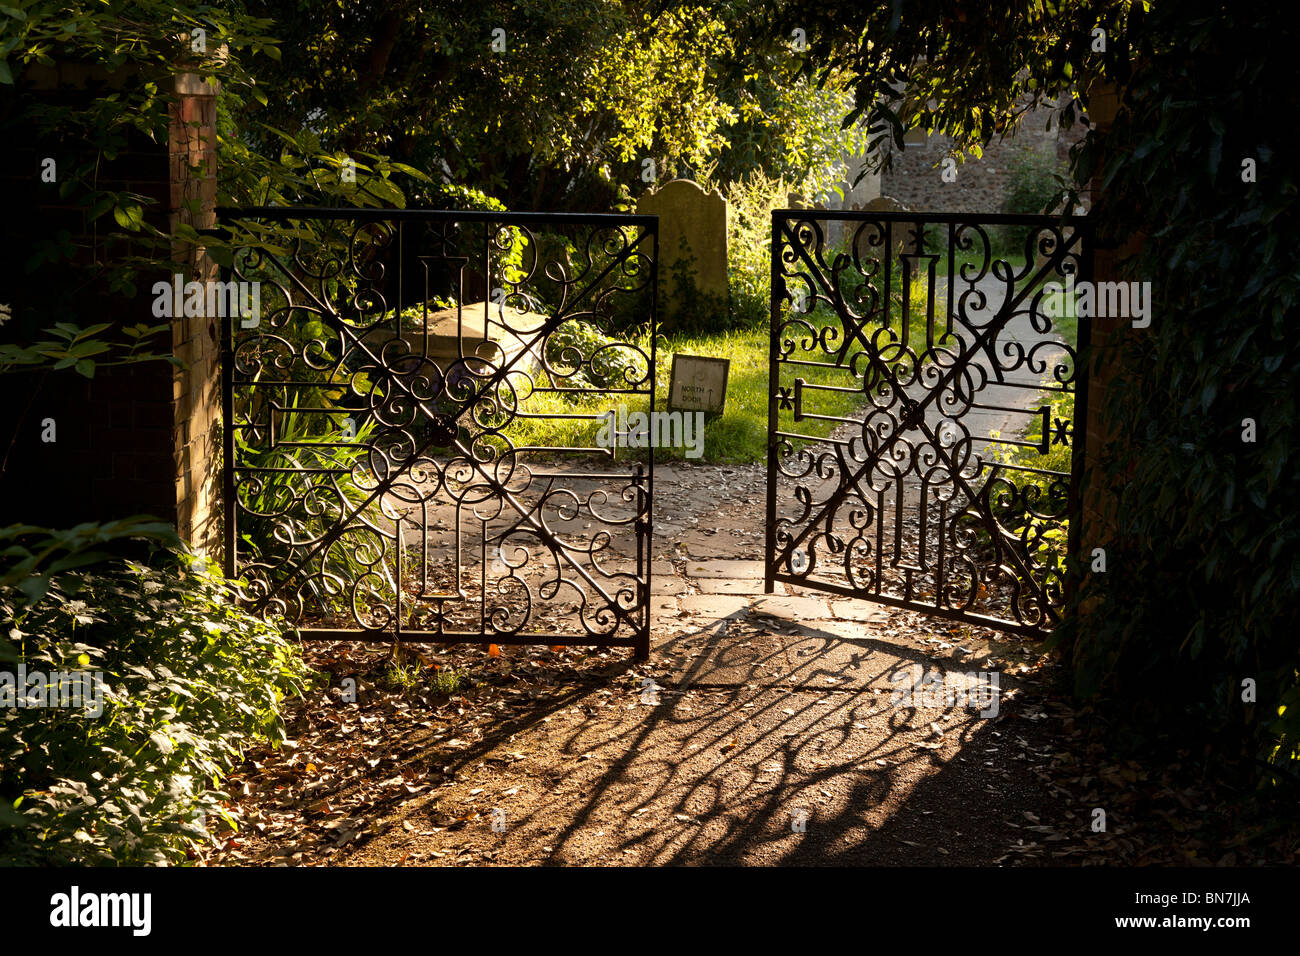 Evening sunlight casting its pattern shadow of the partly open wrought iron gate across the path leading to Bosham Churchyard. Stock Photo